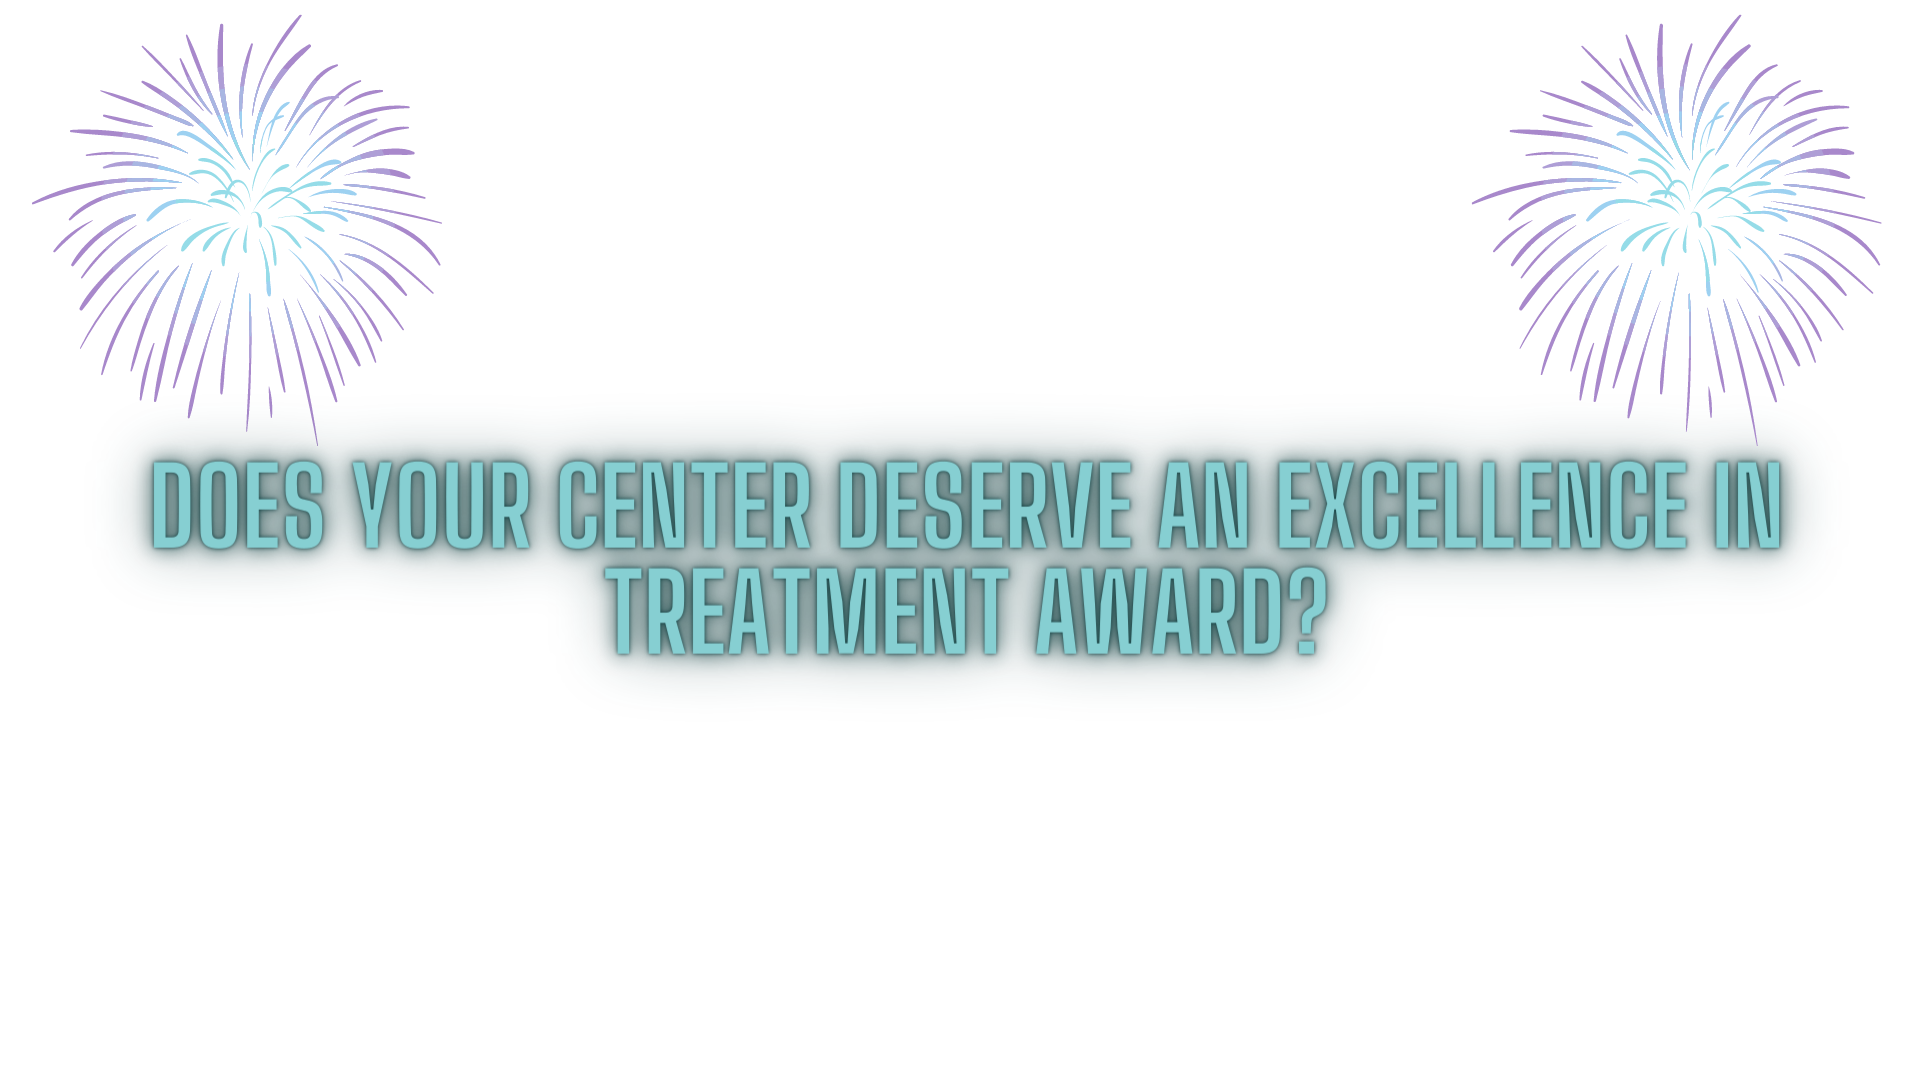 Does your center deserve an excellence in treatment award?